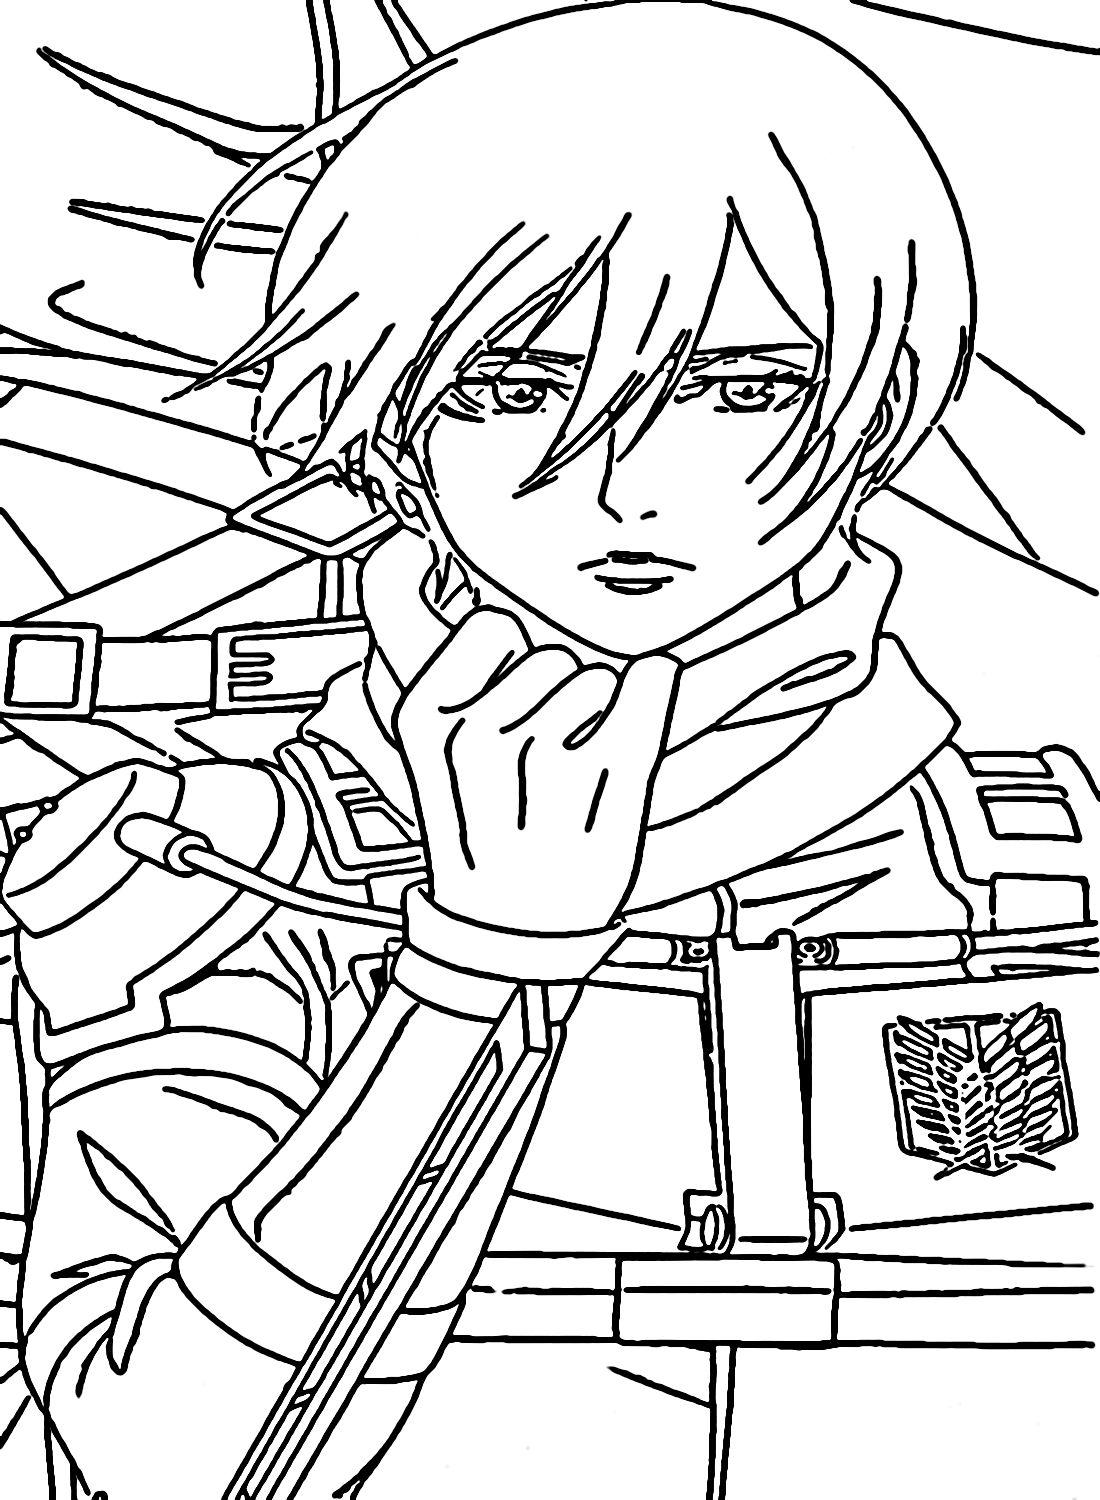 Warrior Mikasa from AOT Coloring Pages